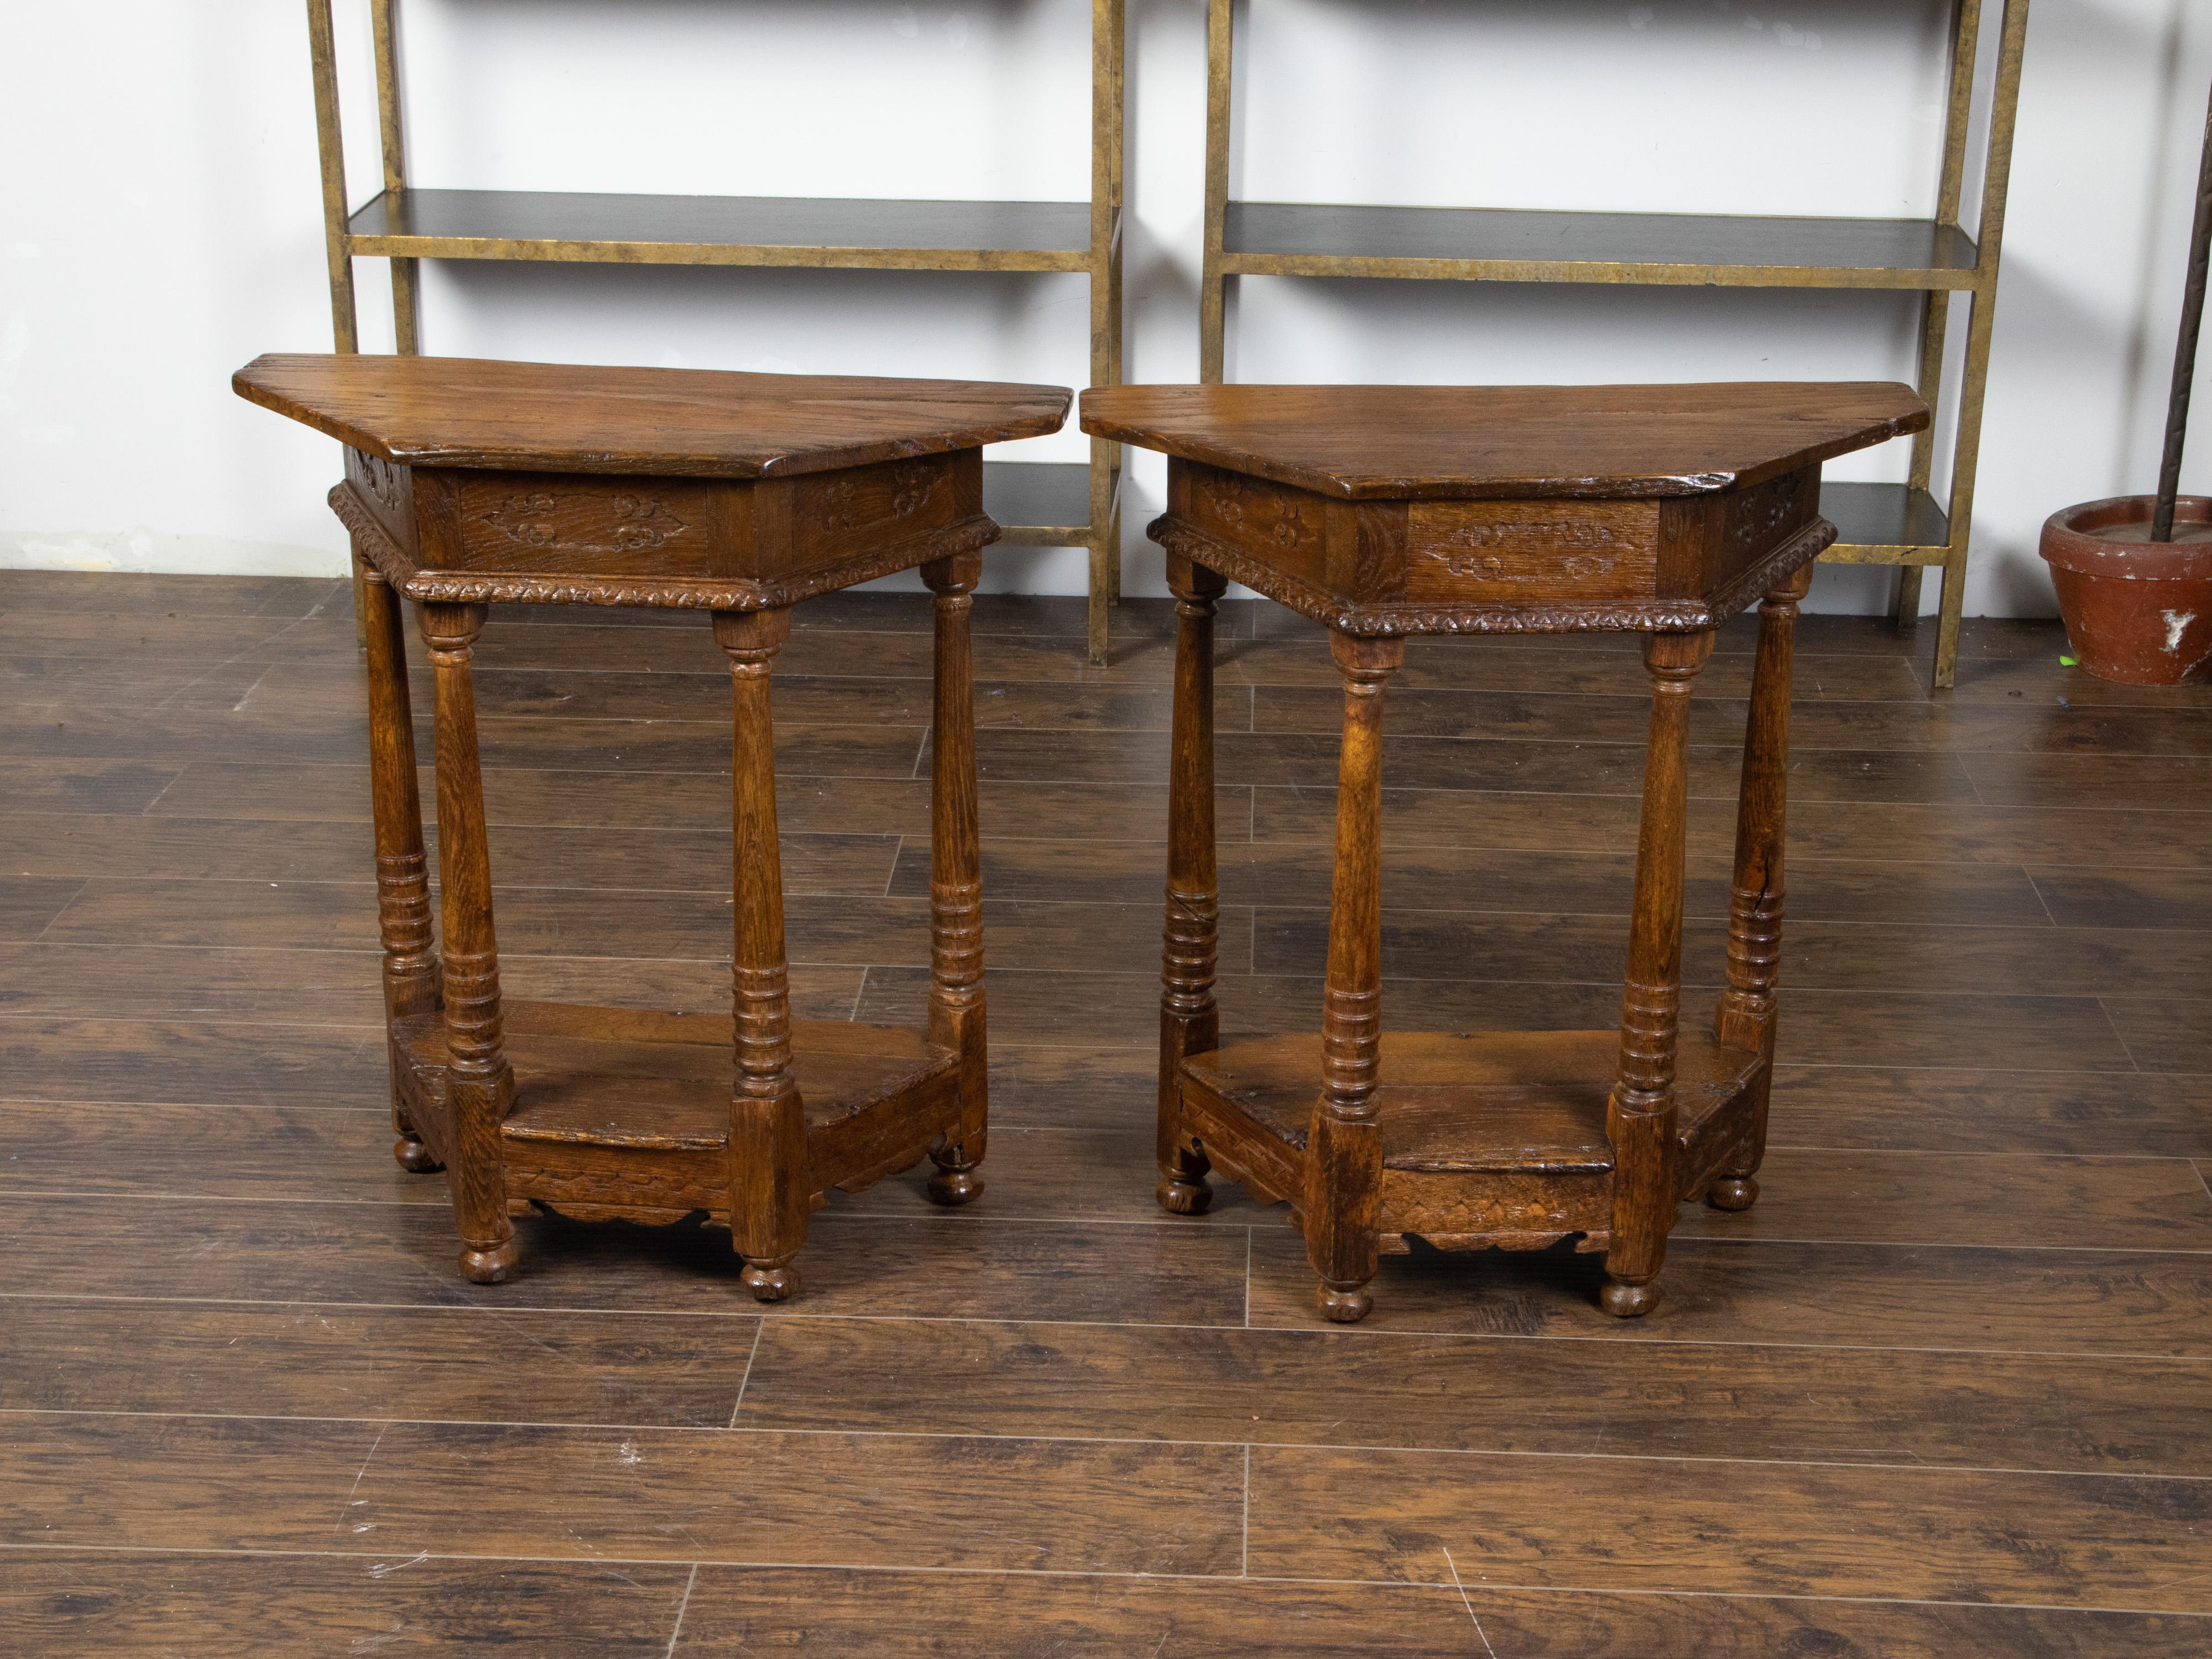 A pair of English oak demilune tables from the 19th century, with polygonal tops, carved aprons and turned legs. Created in England during the 19th century, each of this pair of oak demilunes features a polygonal top sitting above a carved apron.